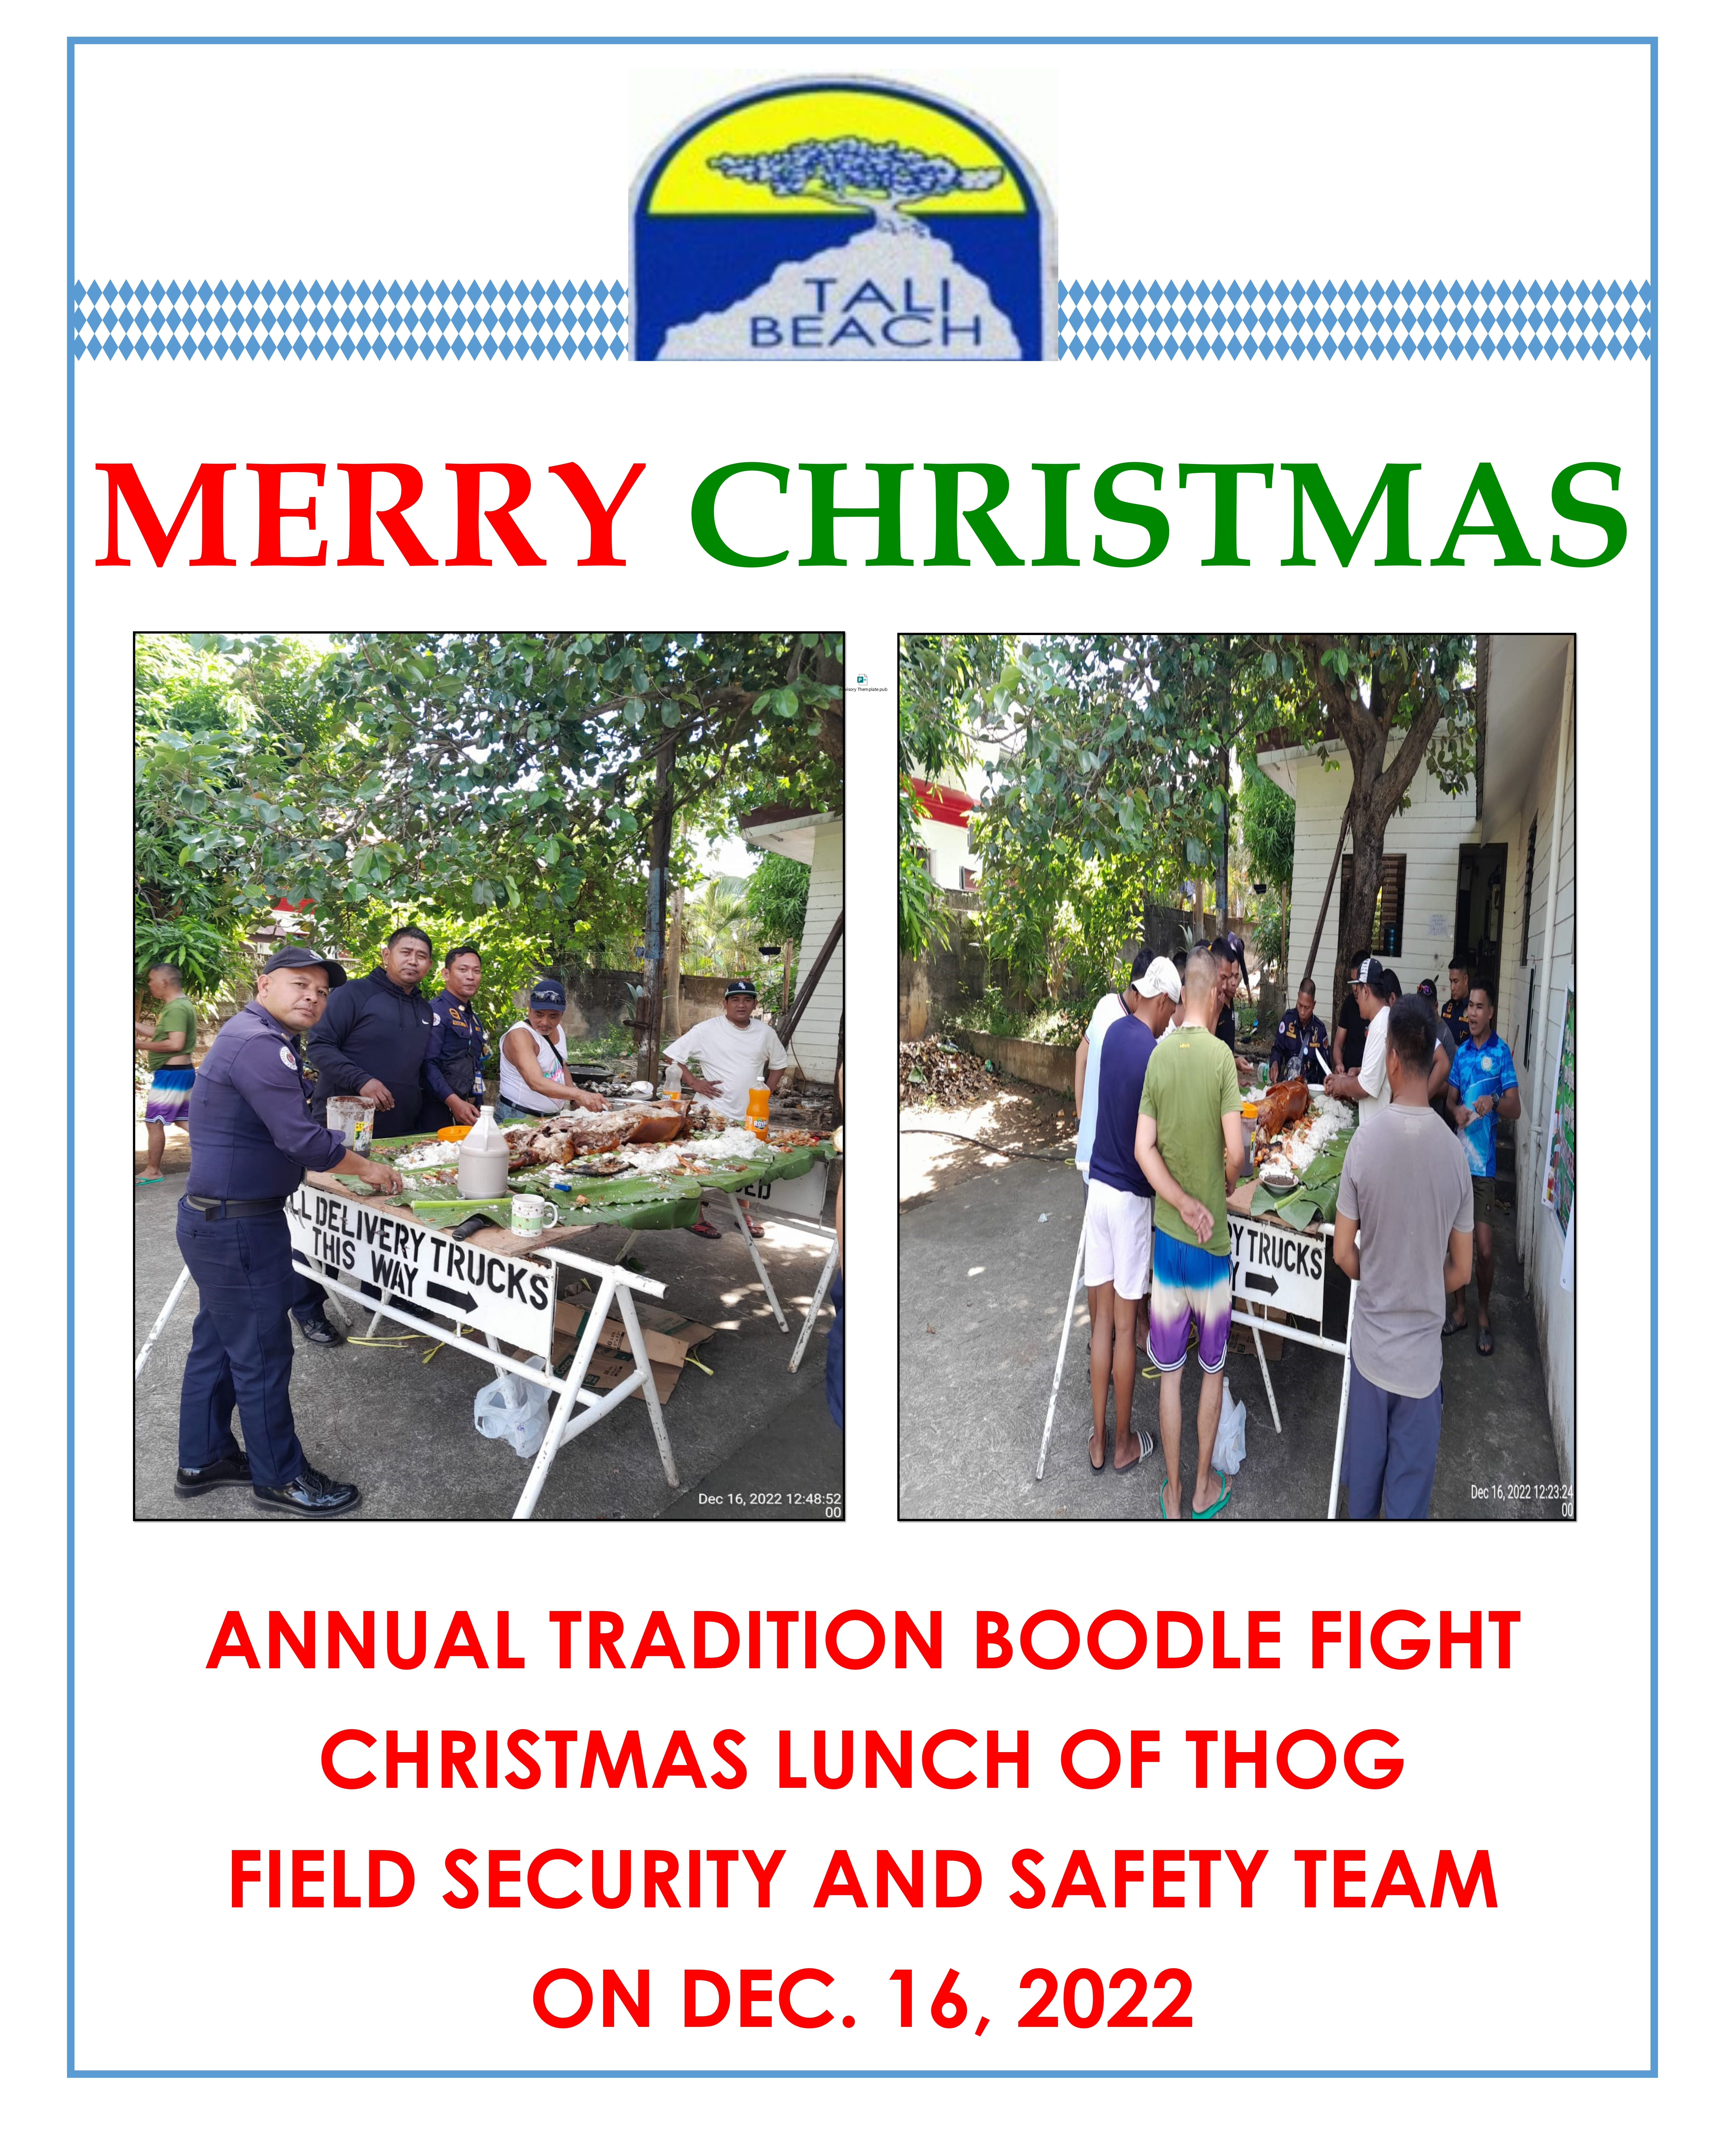 ANNUAL TRADITION BOODLE FIGHT FIELD SECURITY TEAM DECEMBER 2022